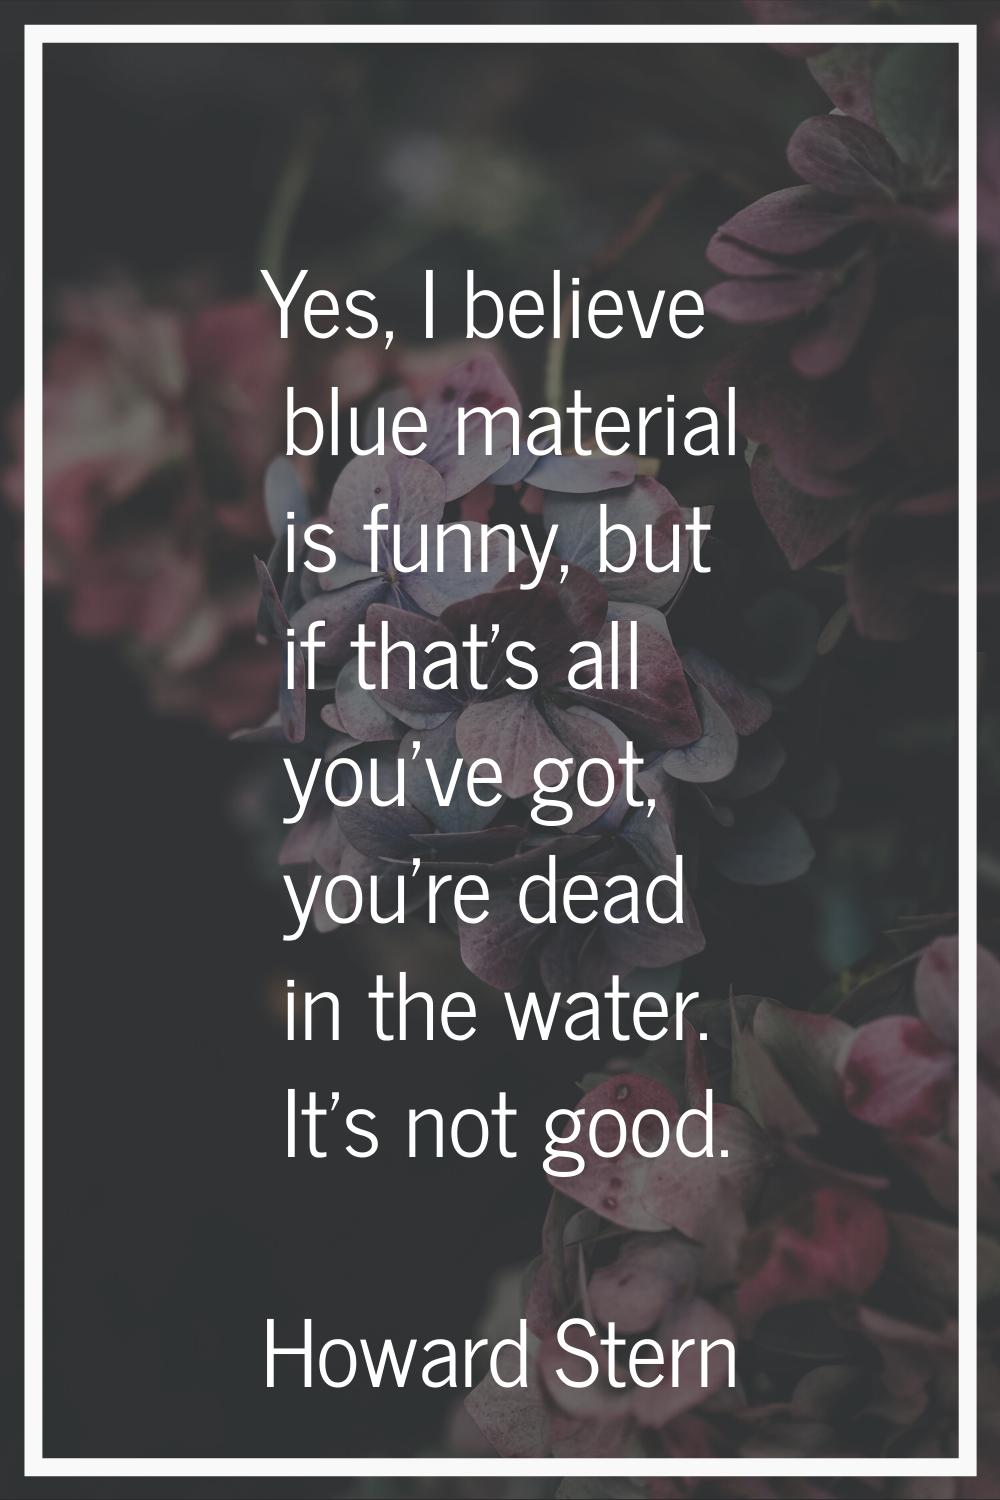 Yes, I believe blue material is funny, but if that's all you've got, you're dead in the water. It's